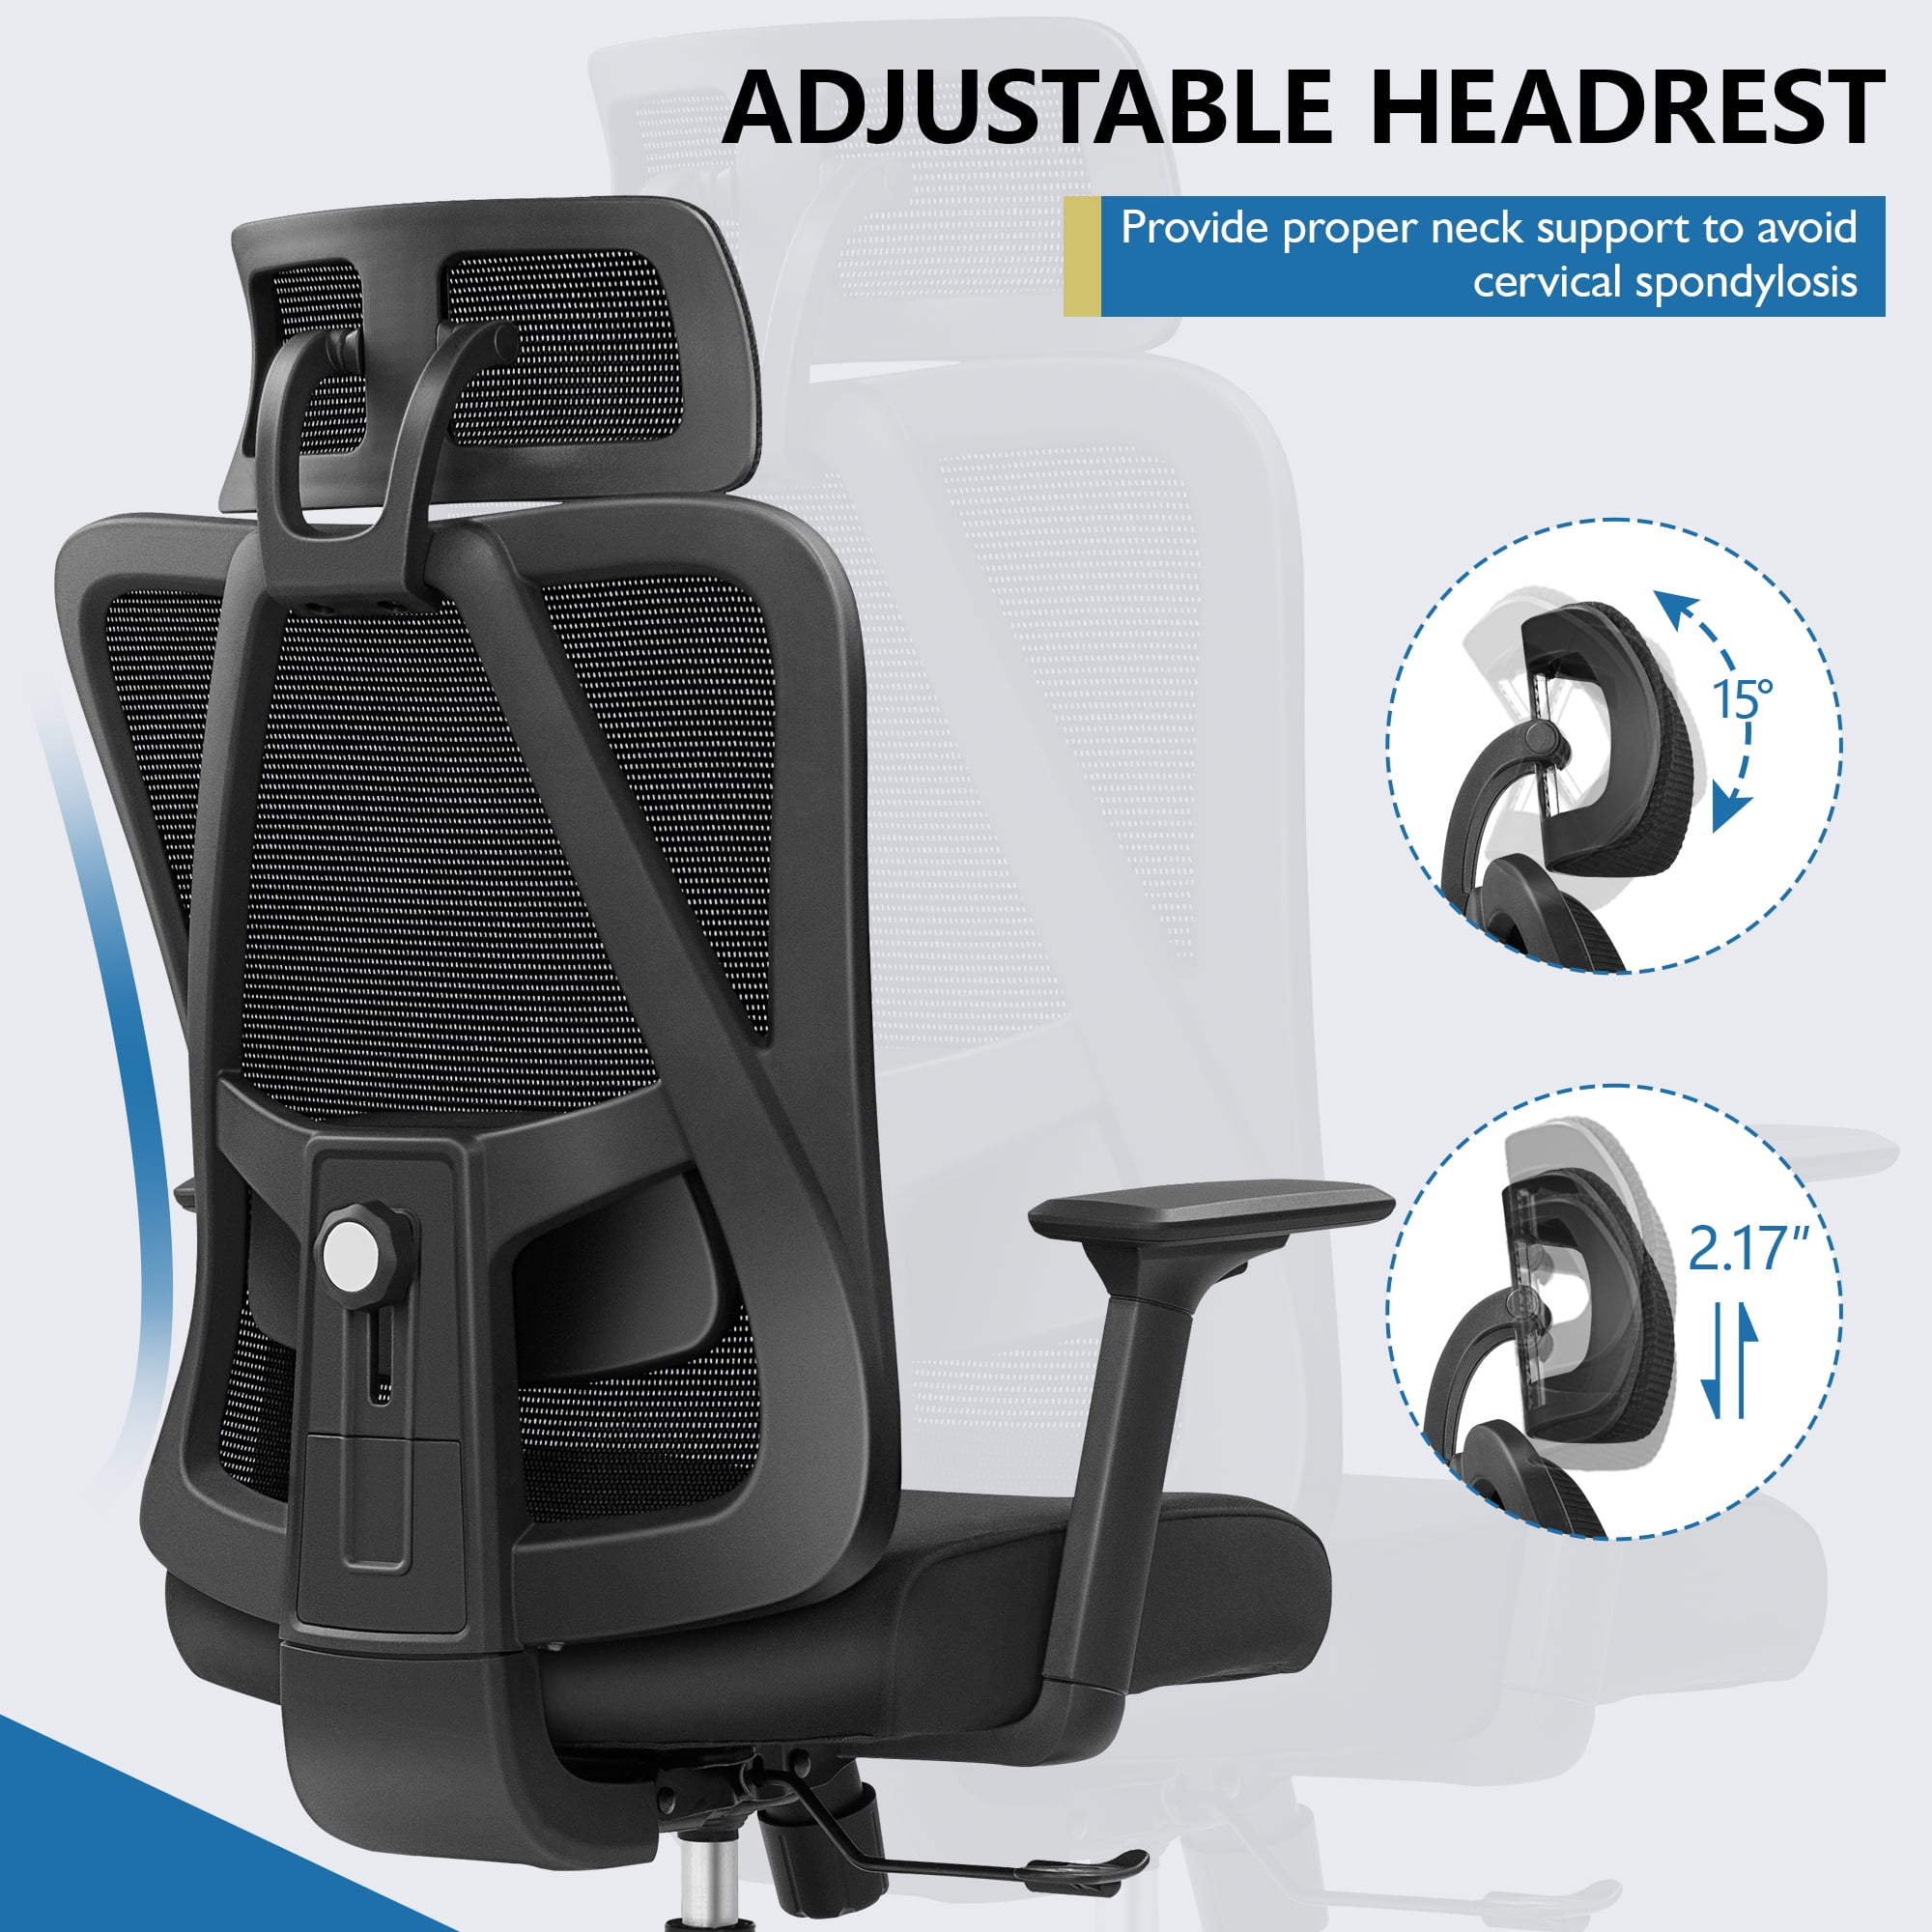 Homoyoyo 2 Sets Adjustable Headrest Gaming Chair Pillow Chair Head Pad Desk  Chair Headrest Soft Pillows Elevation Pillow Office Accessories Computer